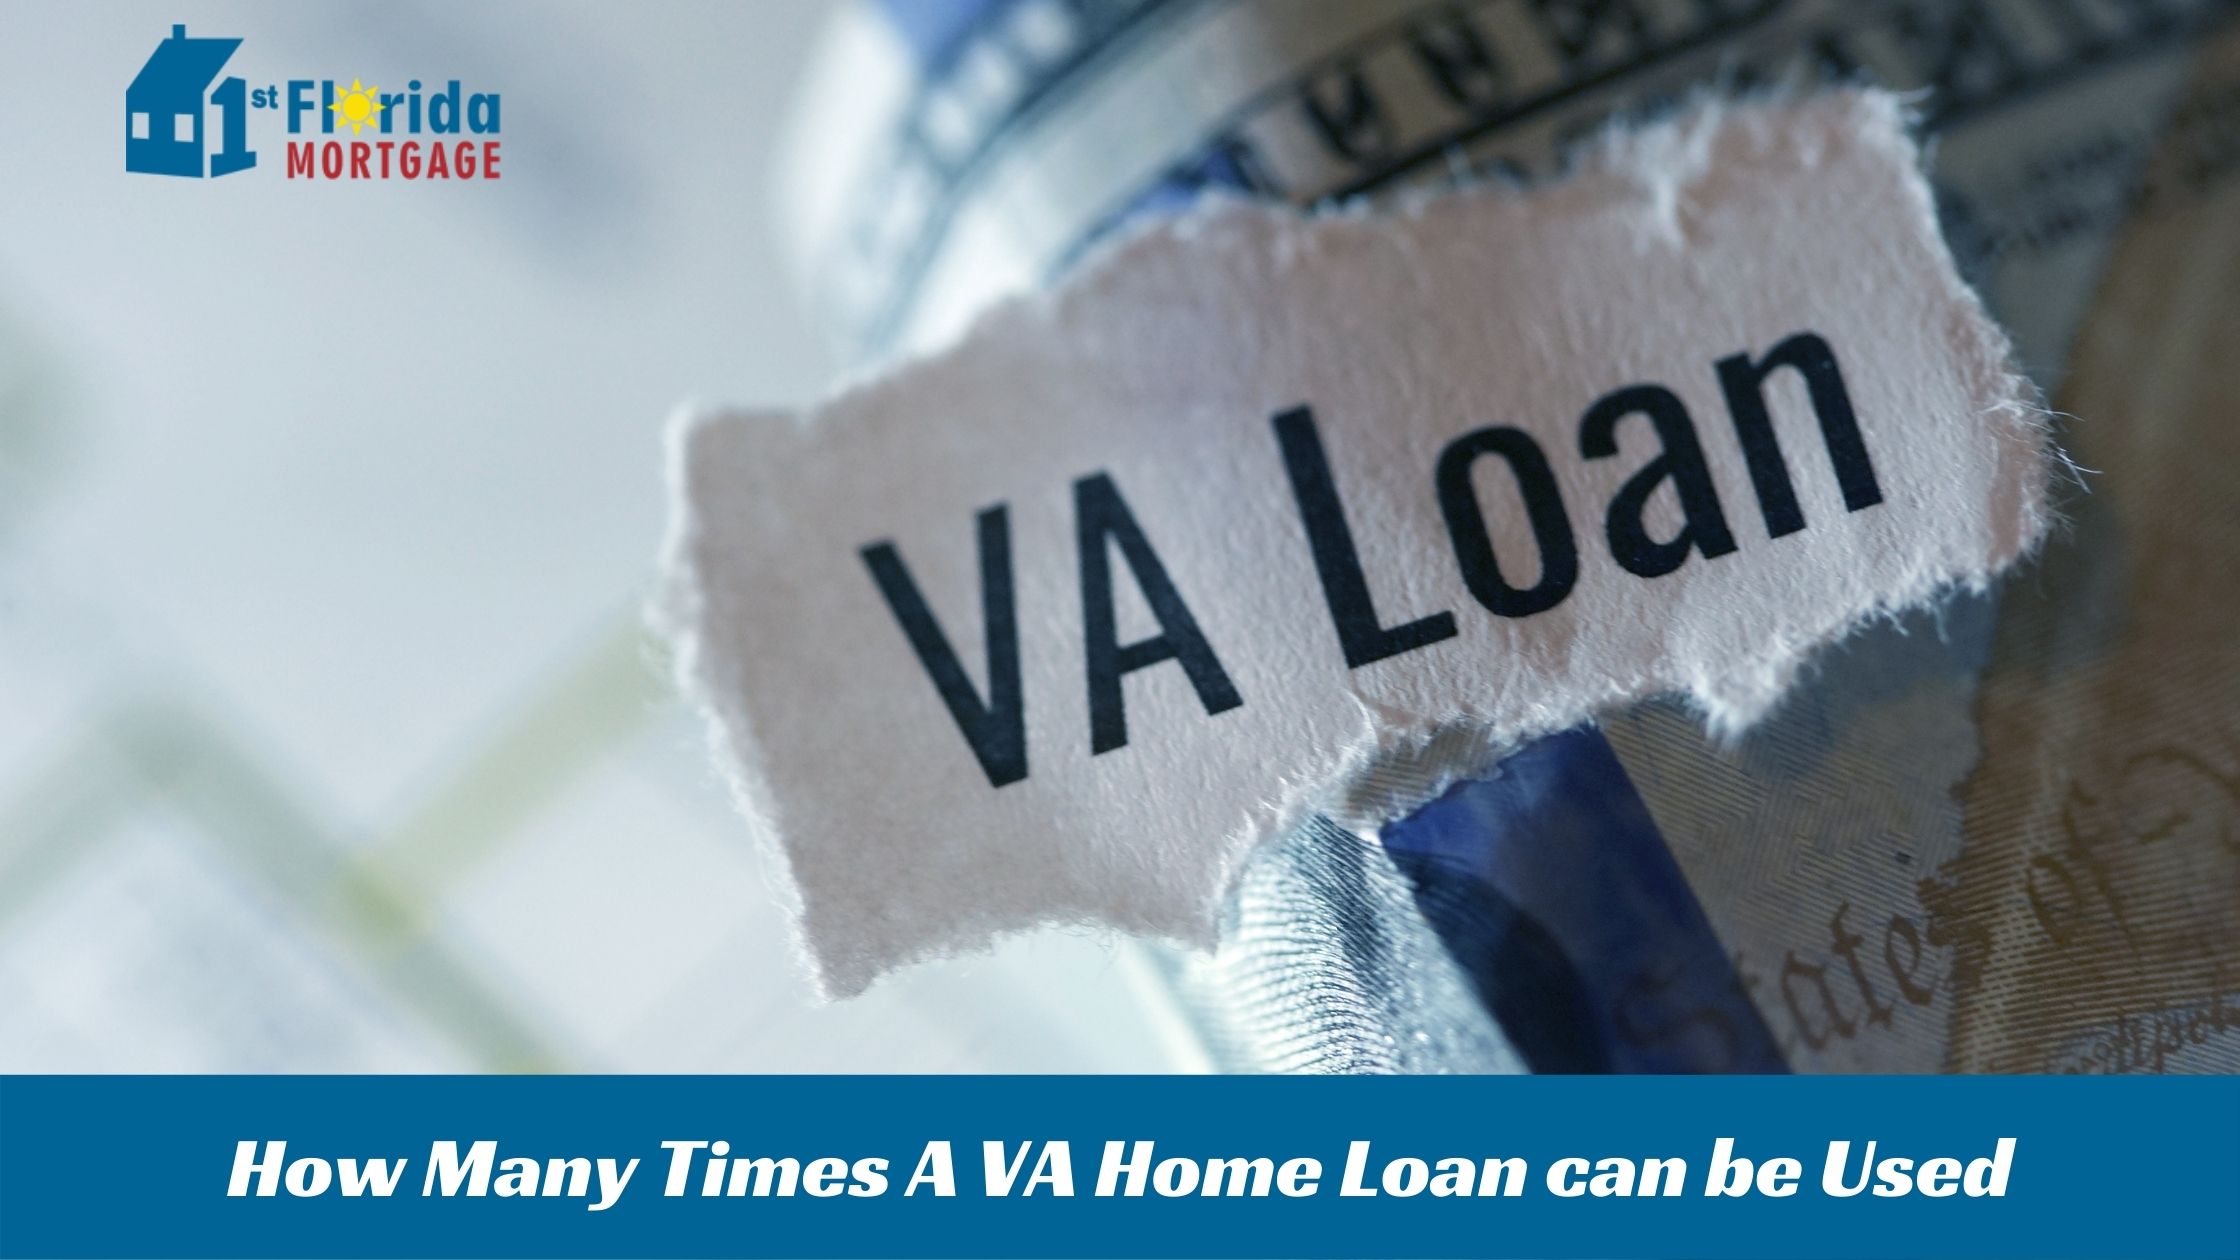 How Many Times A VA Home Loan can be Used